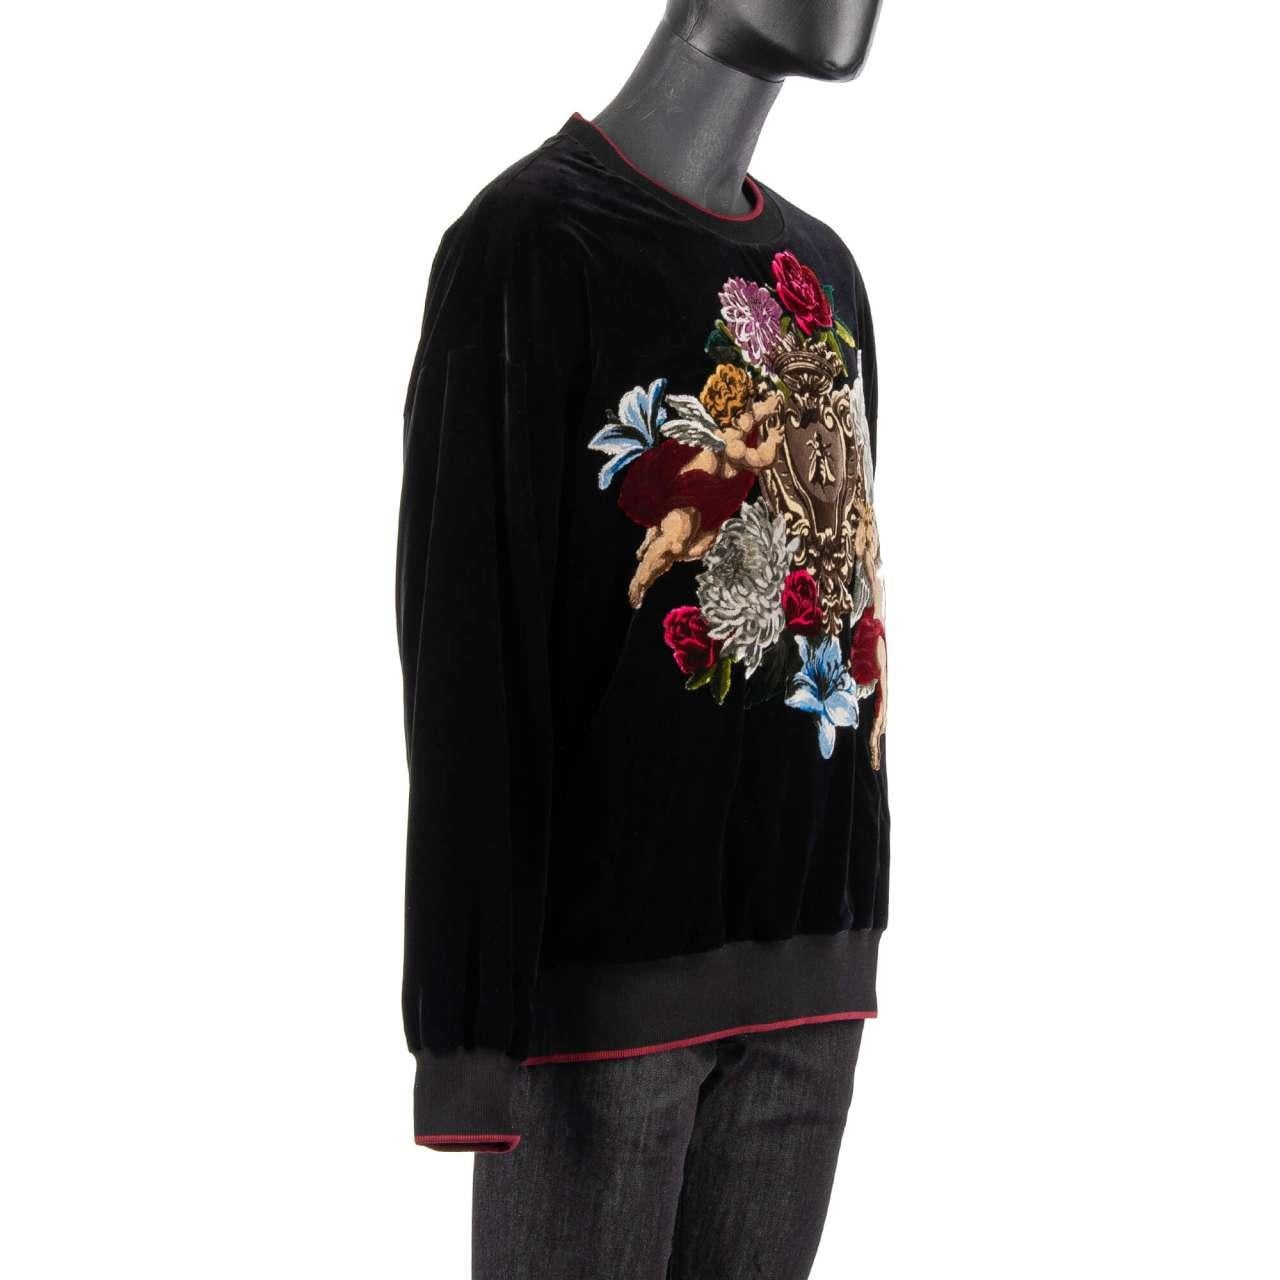 D&G Velvet Sweater with Baroque Angels and Flowers Application Black Red 54 In Excellent Condition For Sale In Erkrath, DE